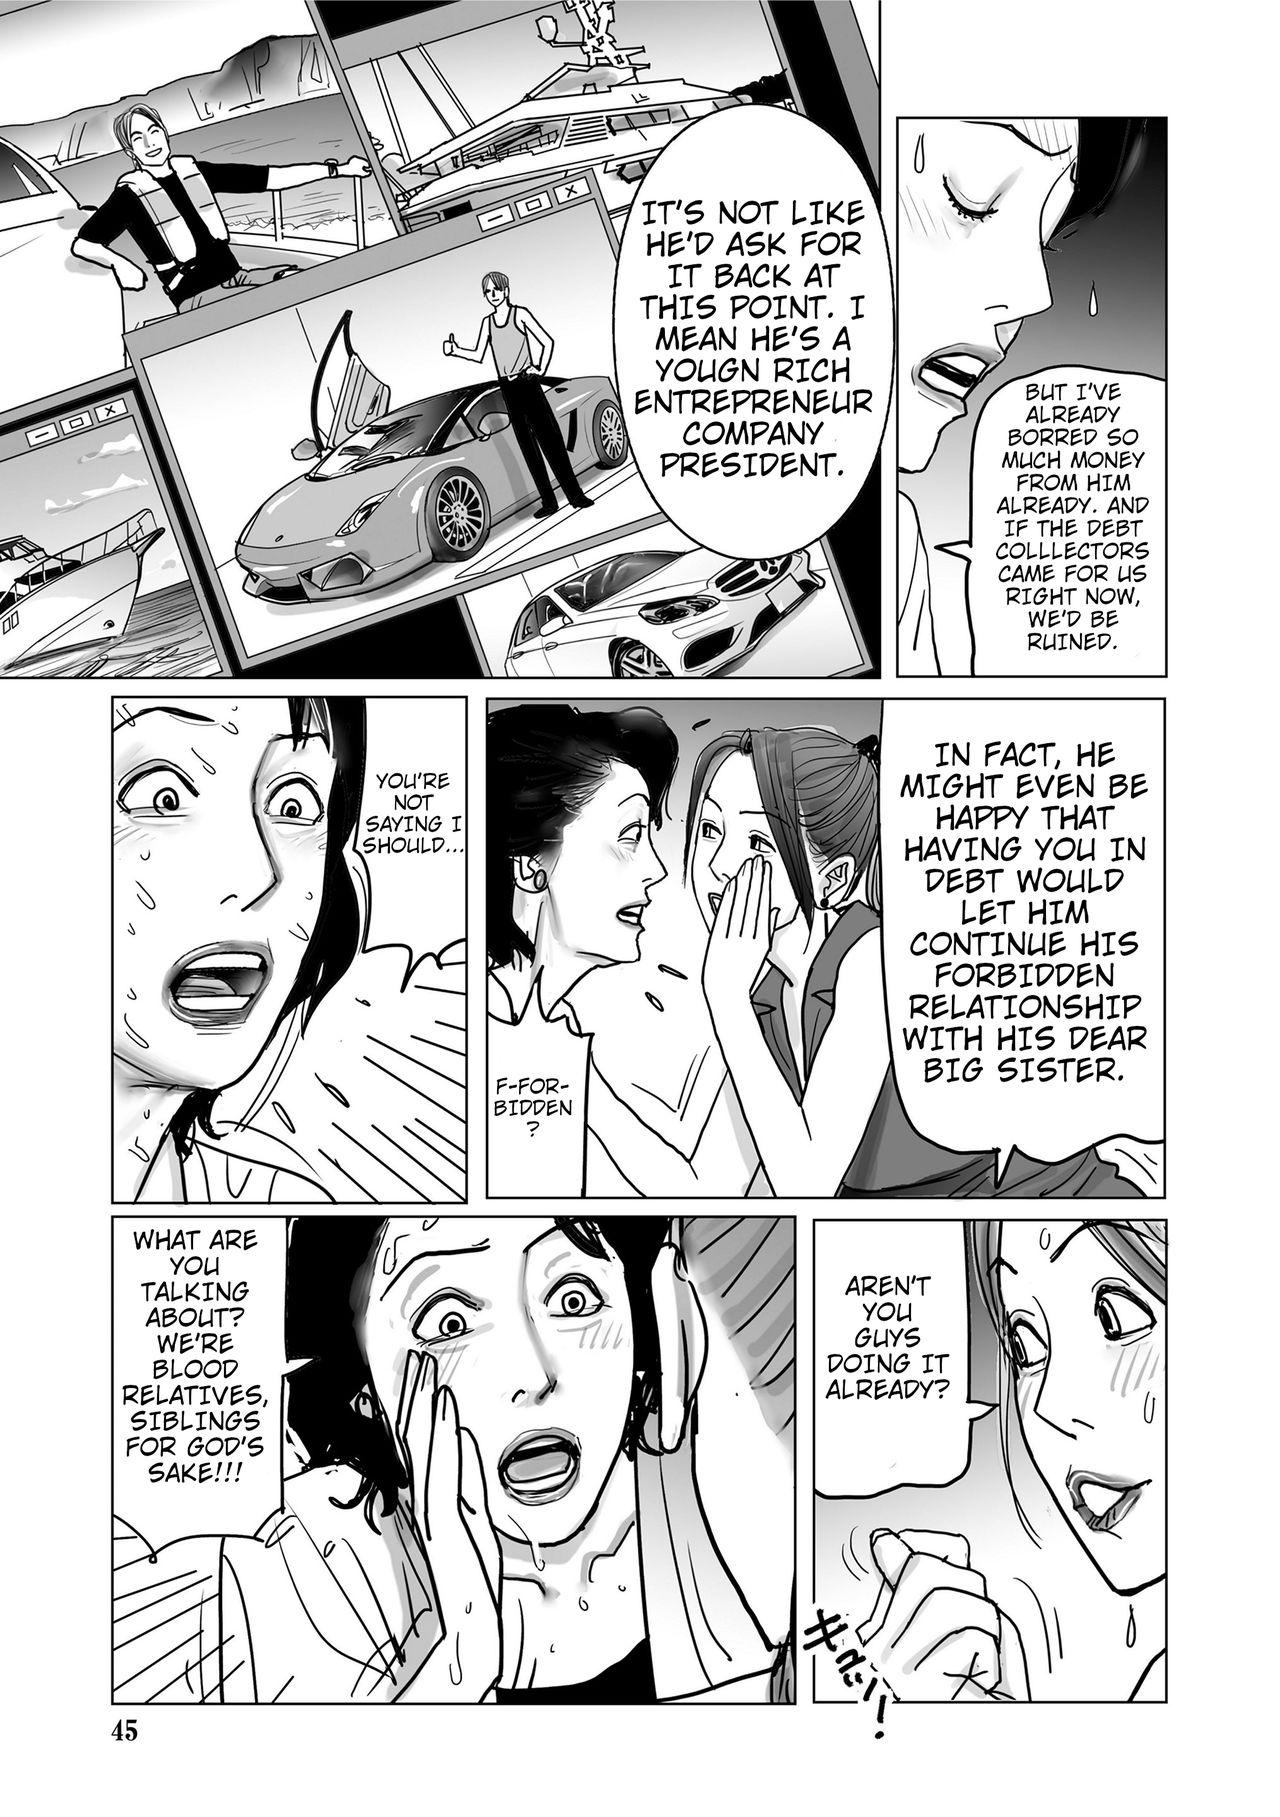 Bald Pussy Kinshinkan De Seikatsuhi wo Eru Hizunda Kyodai | The Twisted Big Sister Who does Incest With Her Little Brother to Get By Classic - Page 7